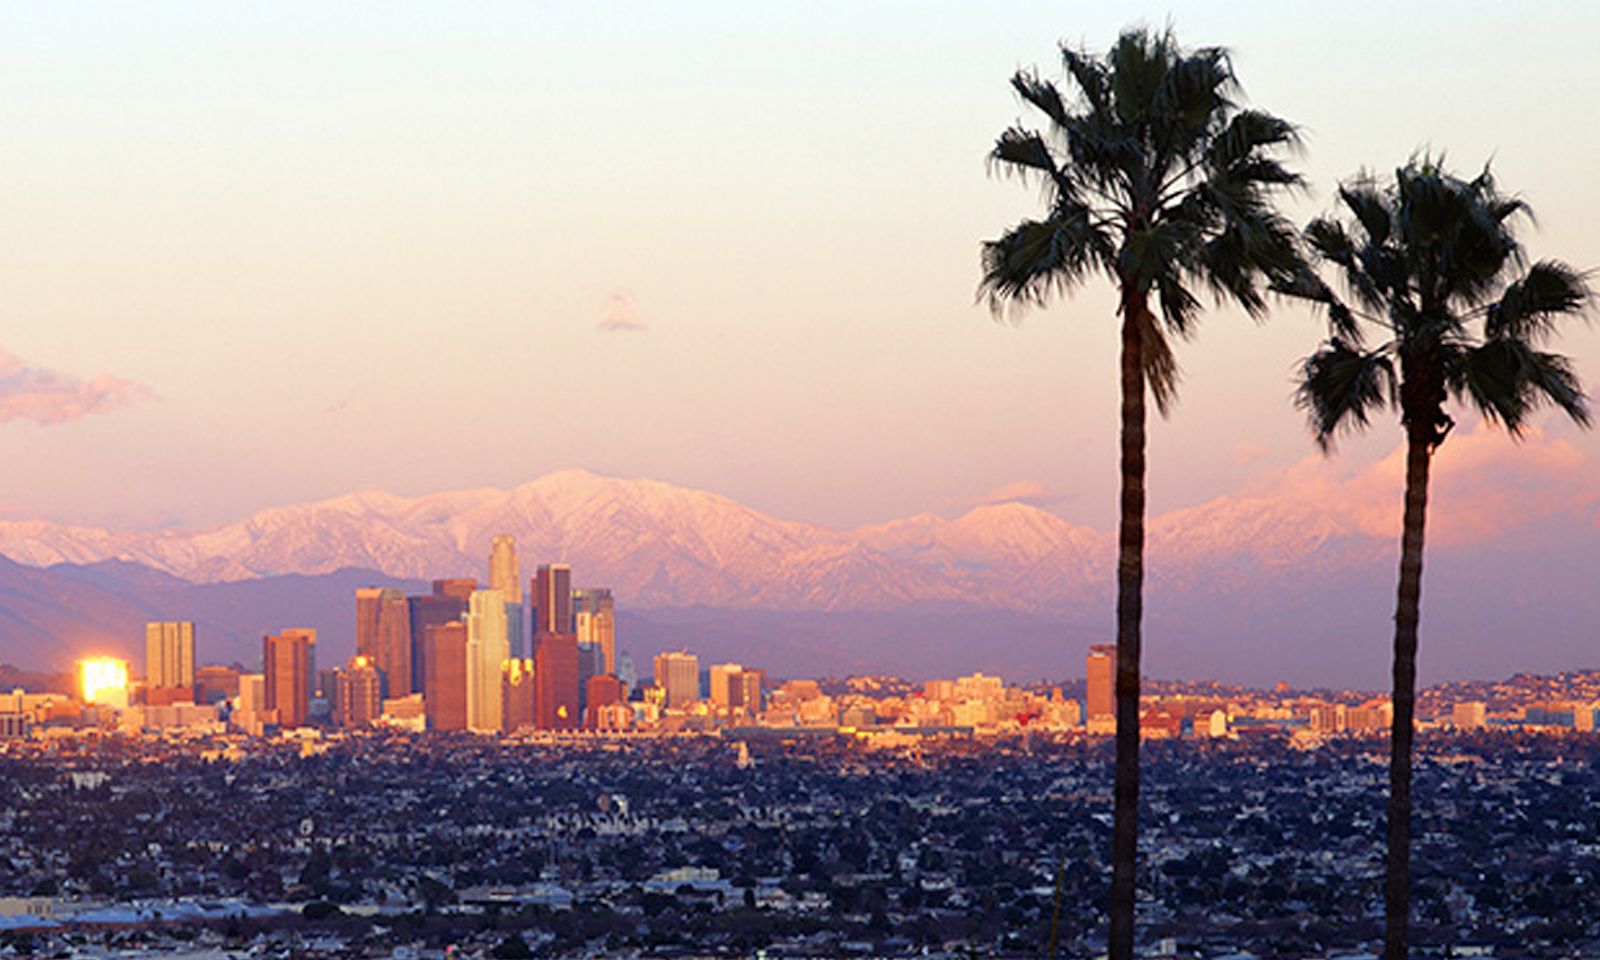 Los Angeles Makes List of Most Sexual Cities